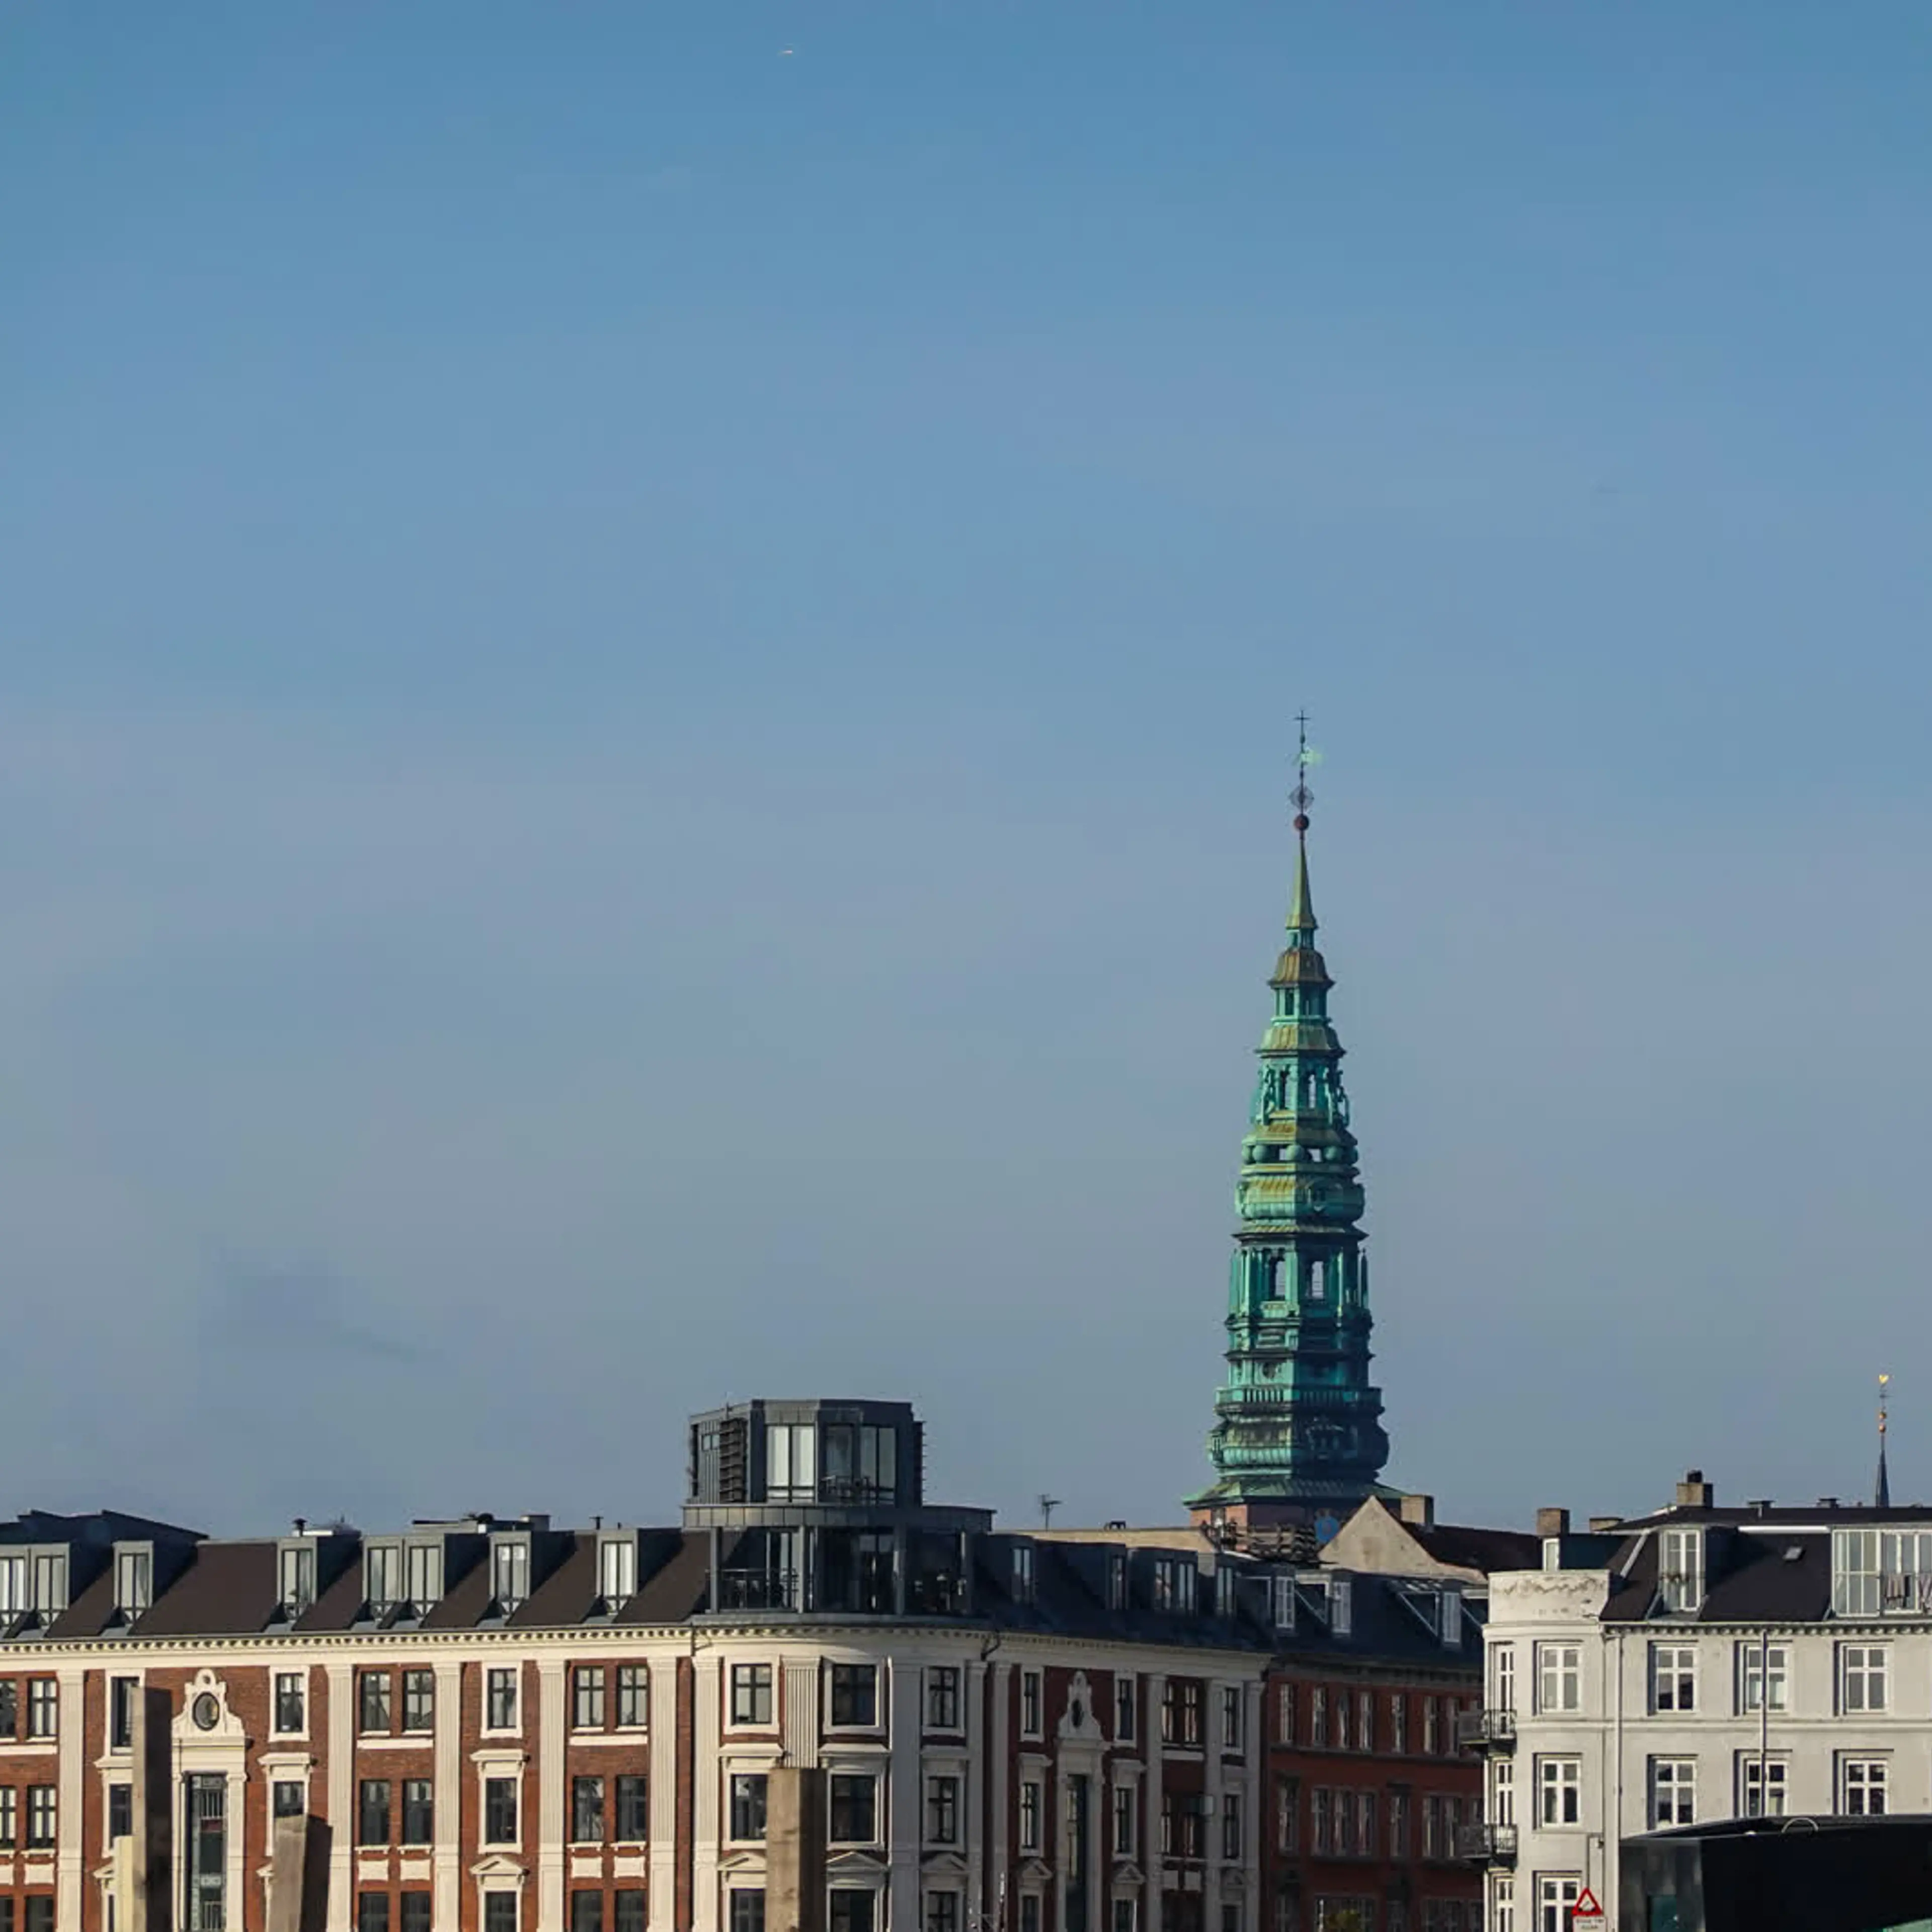 View towards Christiansborg Tower over the roofs of Copenhagen